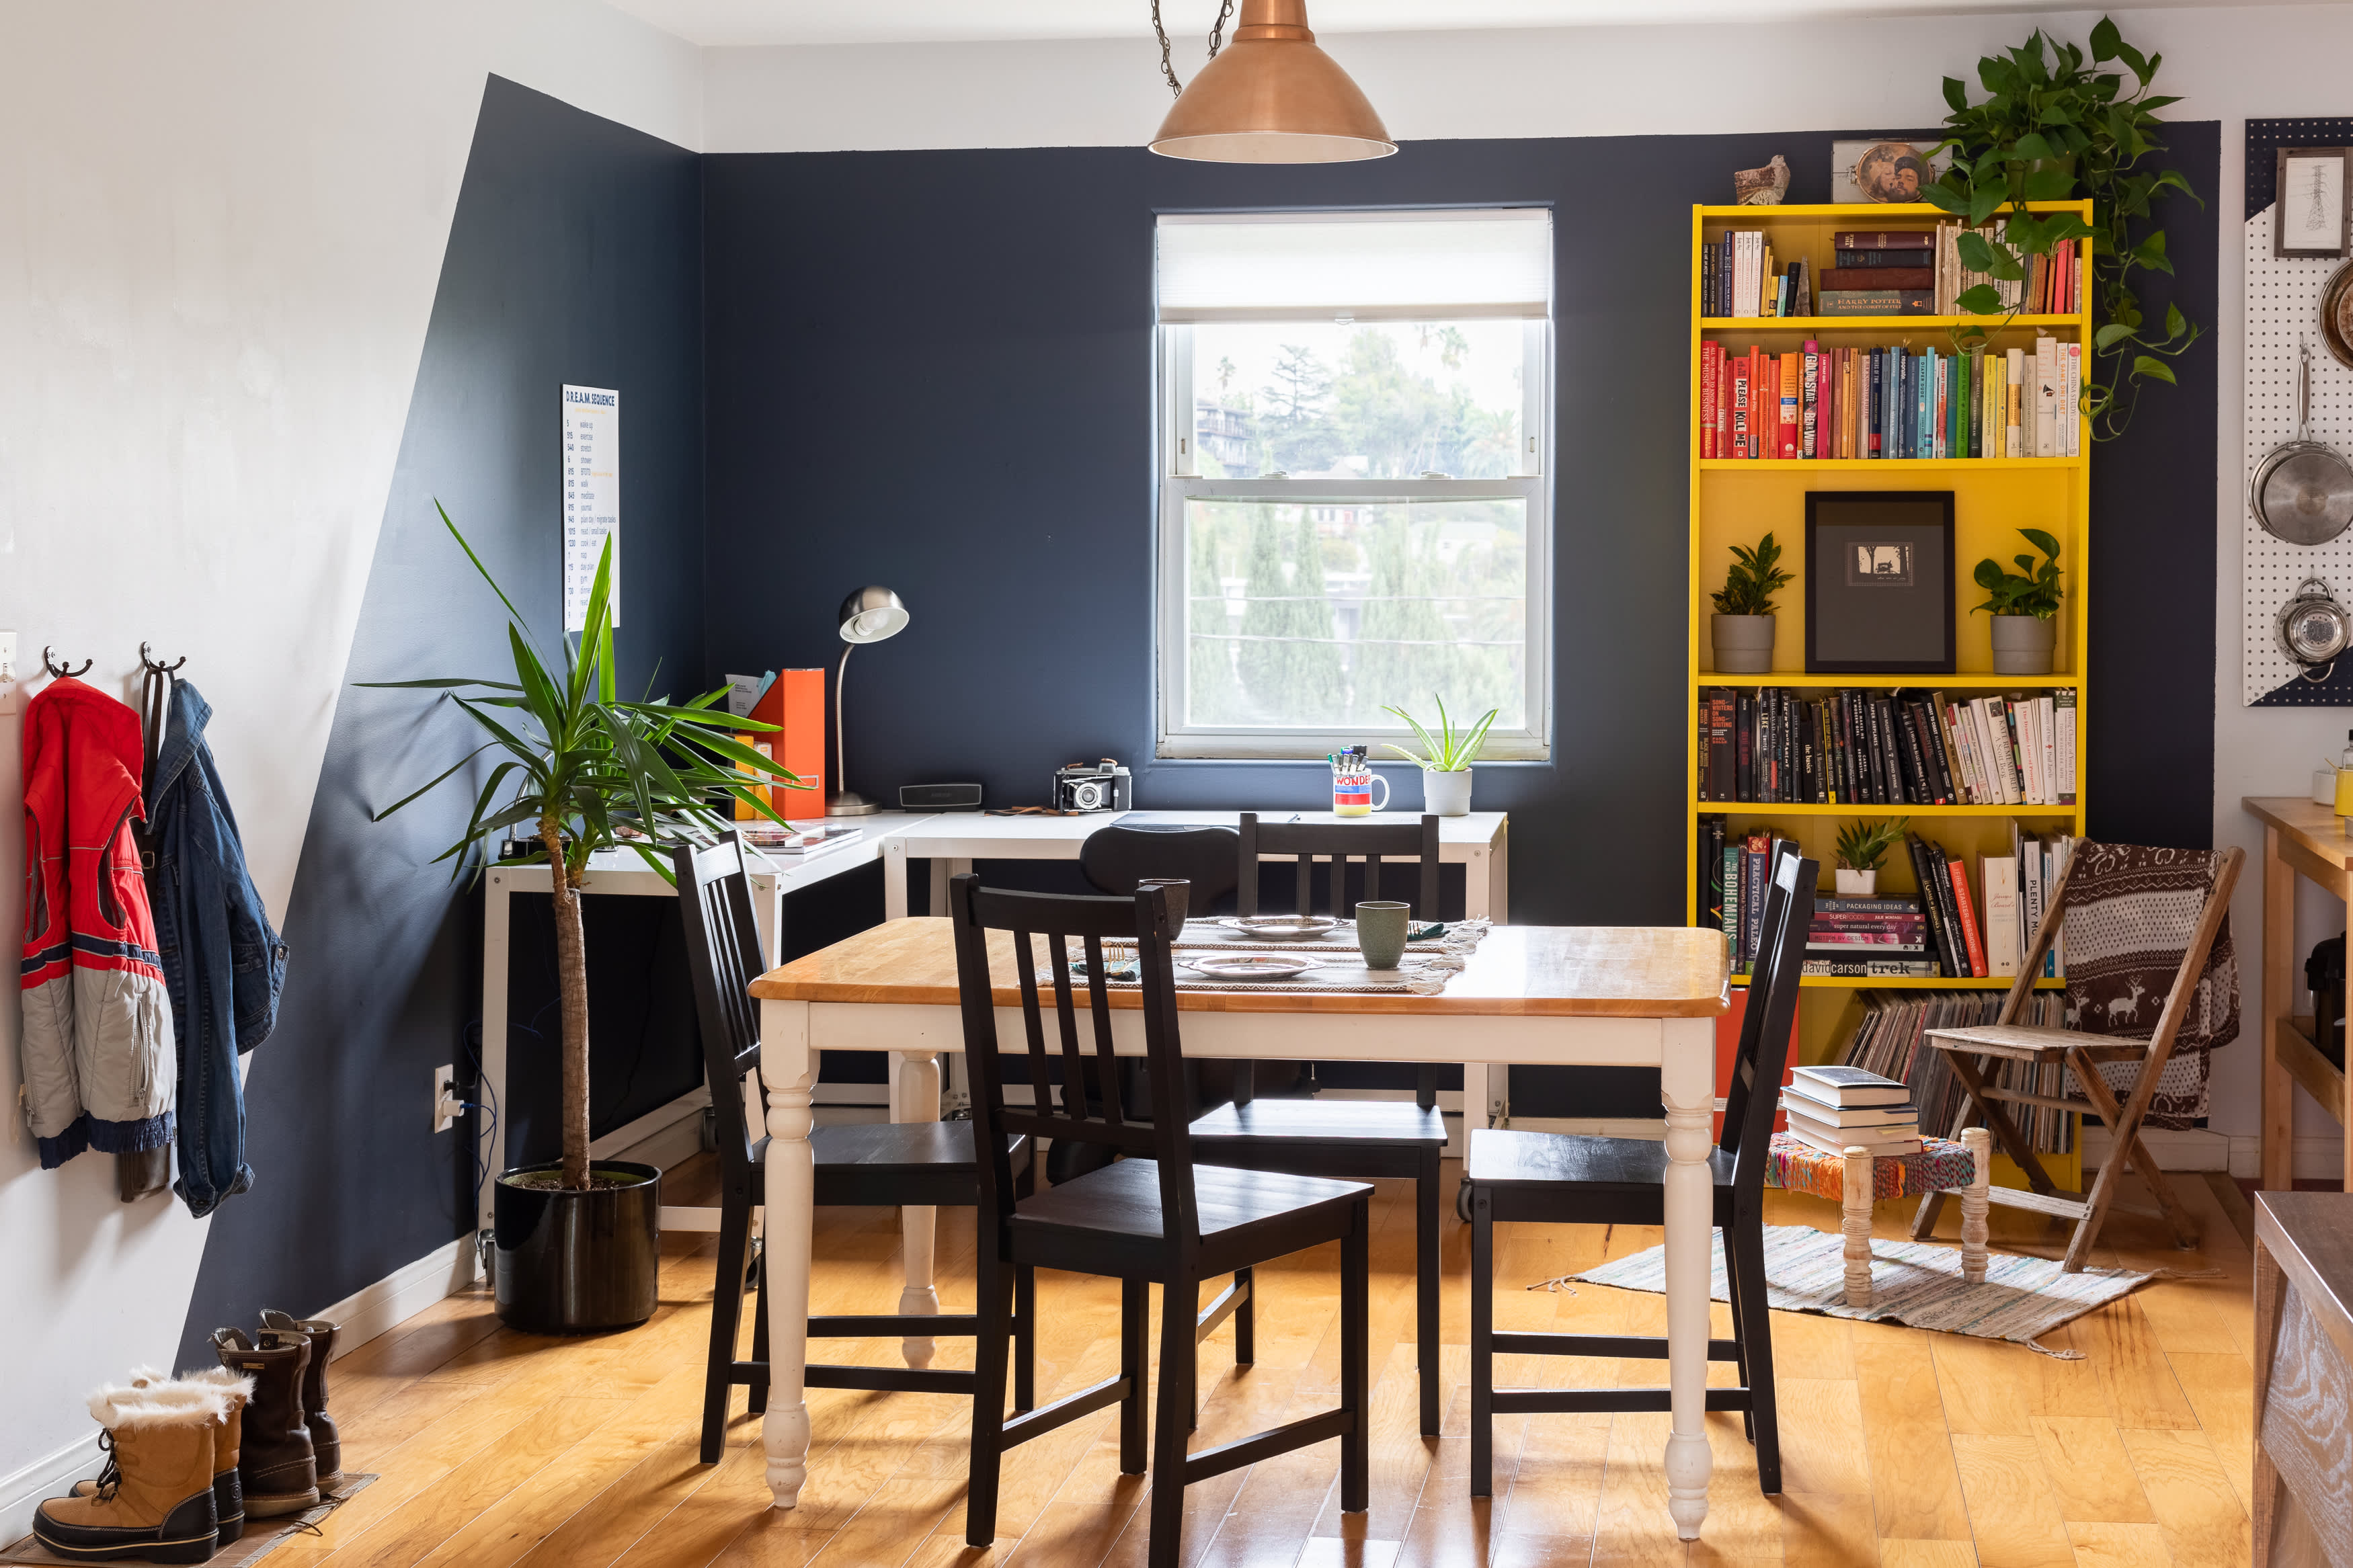 8 Cheap, Landlord-Friendly Ways to Upgrade Your Rental - The New